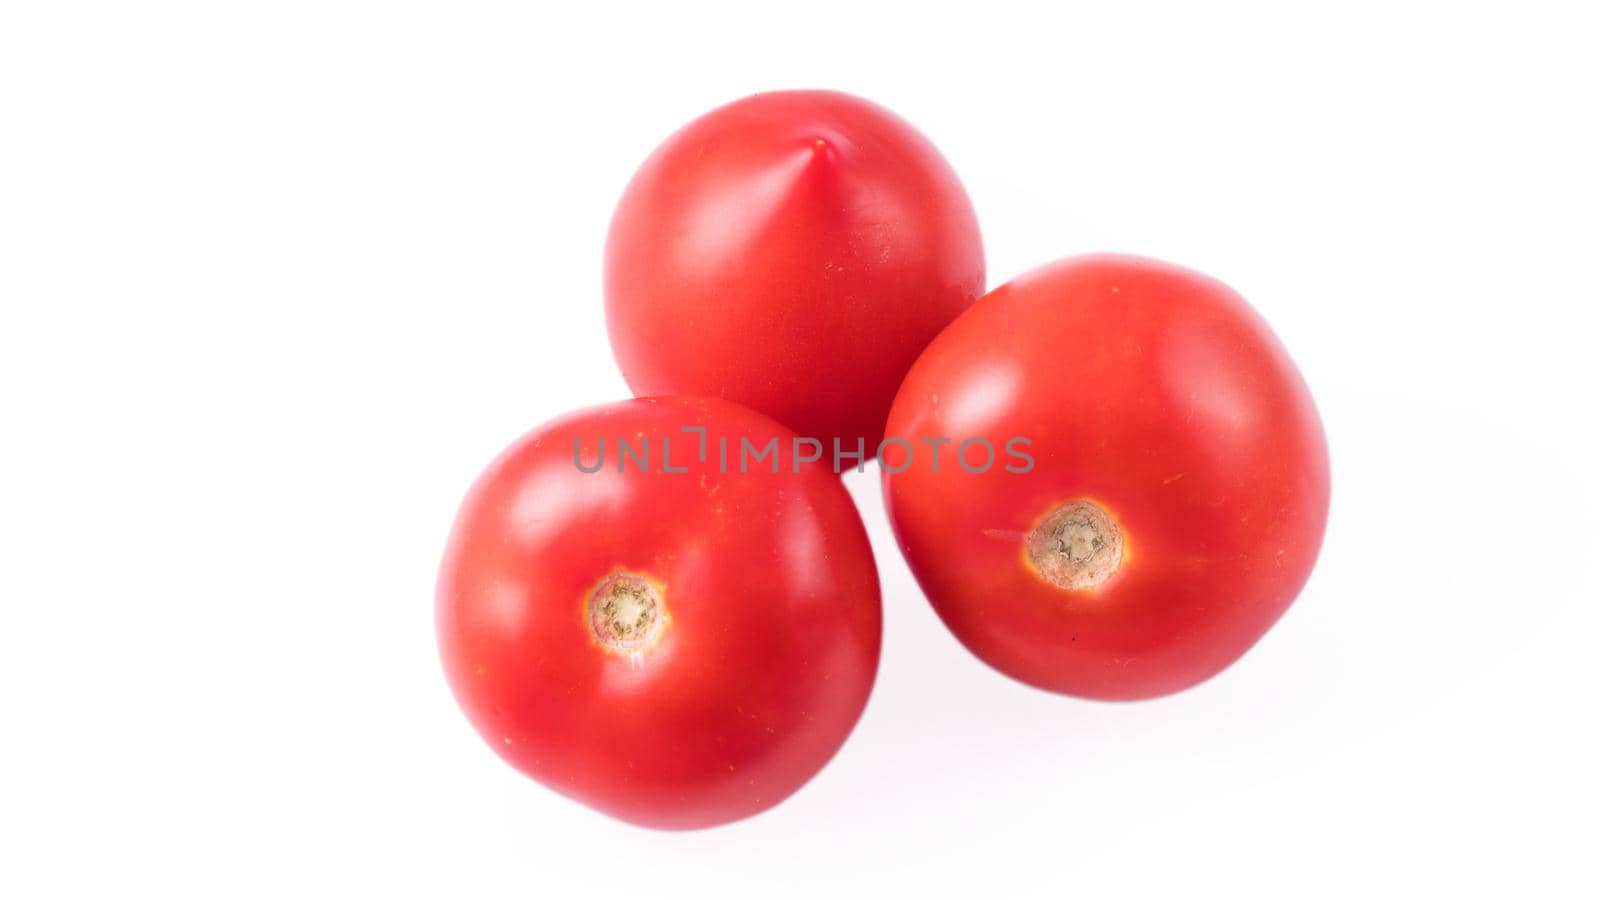 Three whole tomatoes on a white background in isolation by A_A